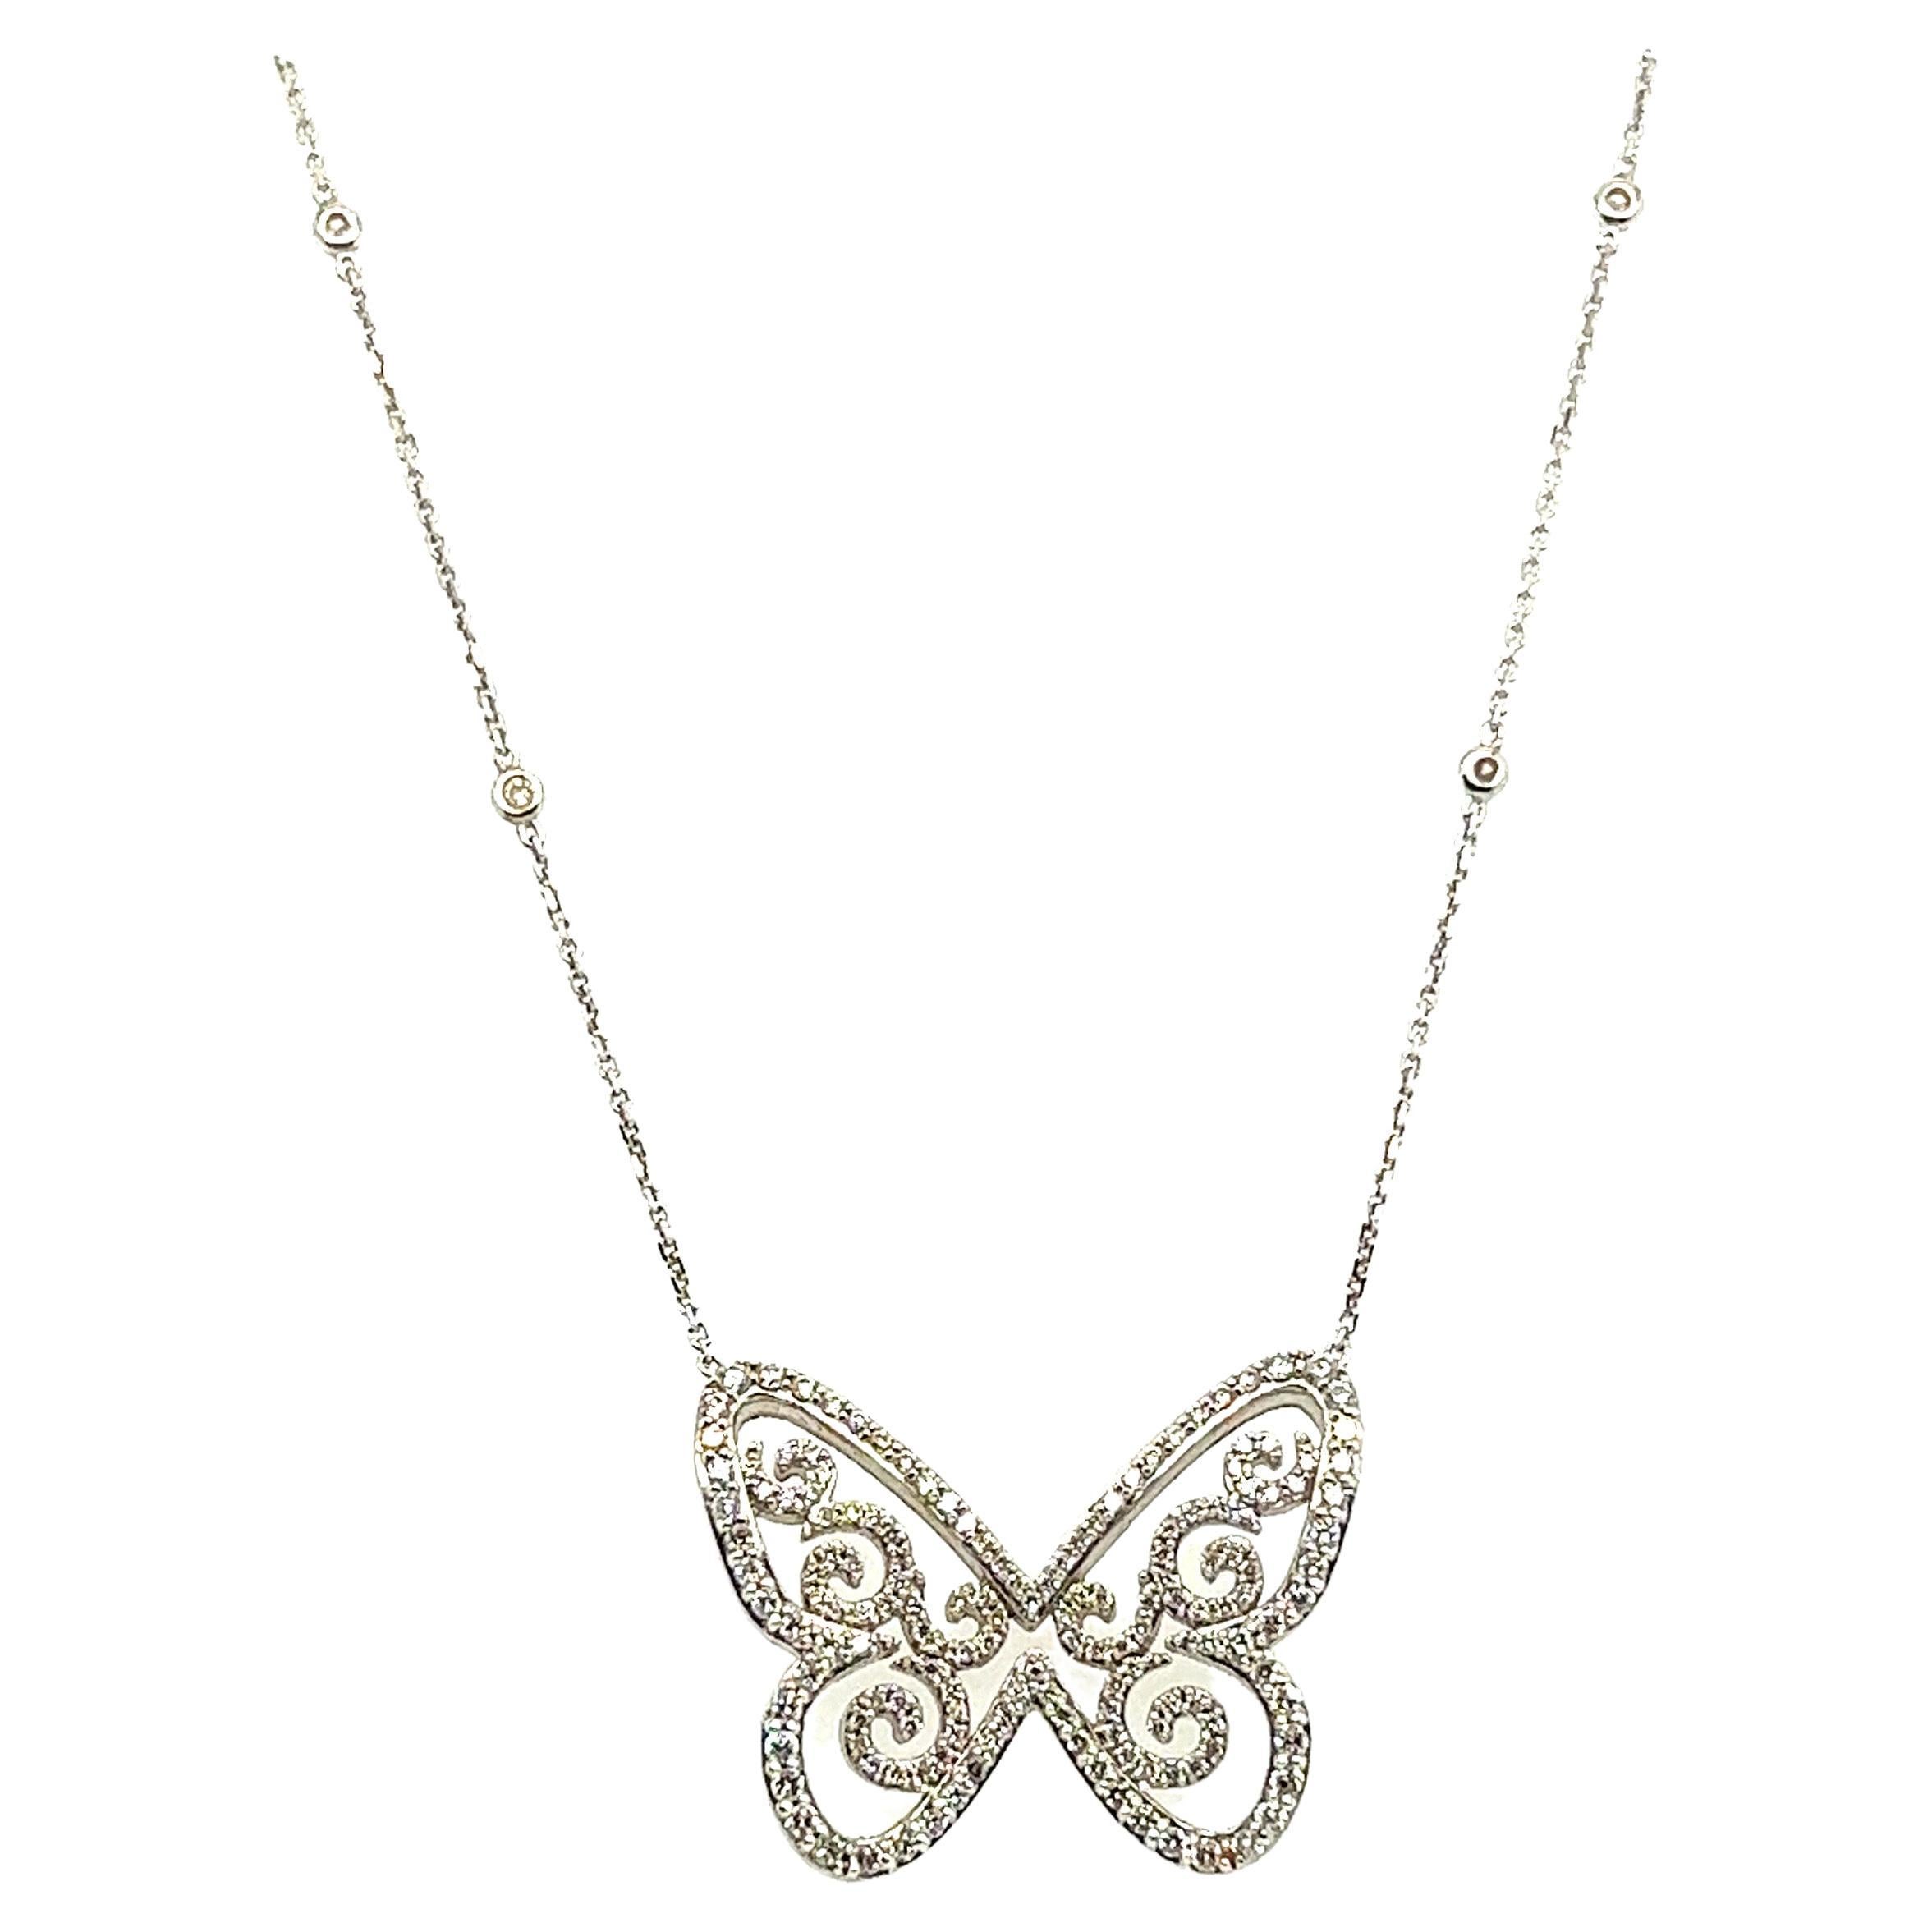 Messika "Butterfly" Pendant on an 18K White Gold Chain, Diamond Pavement For Sale